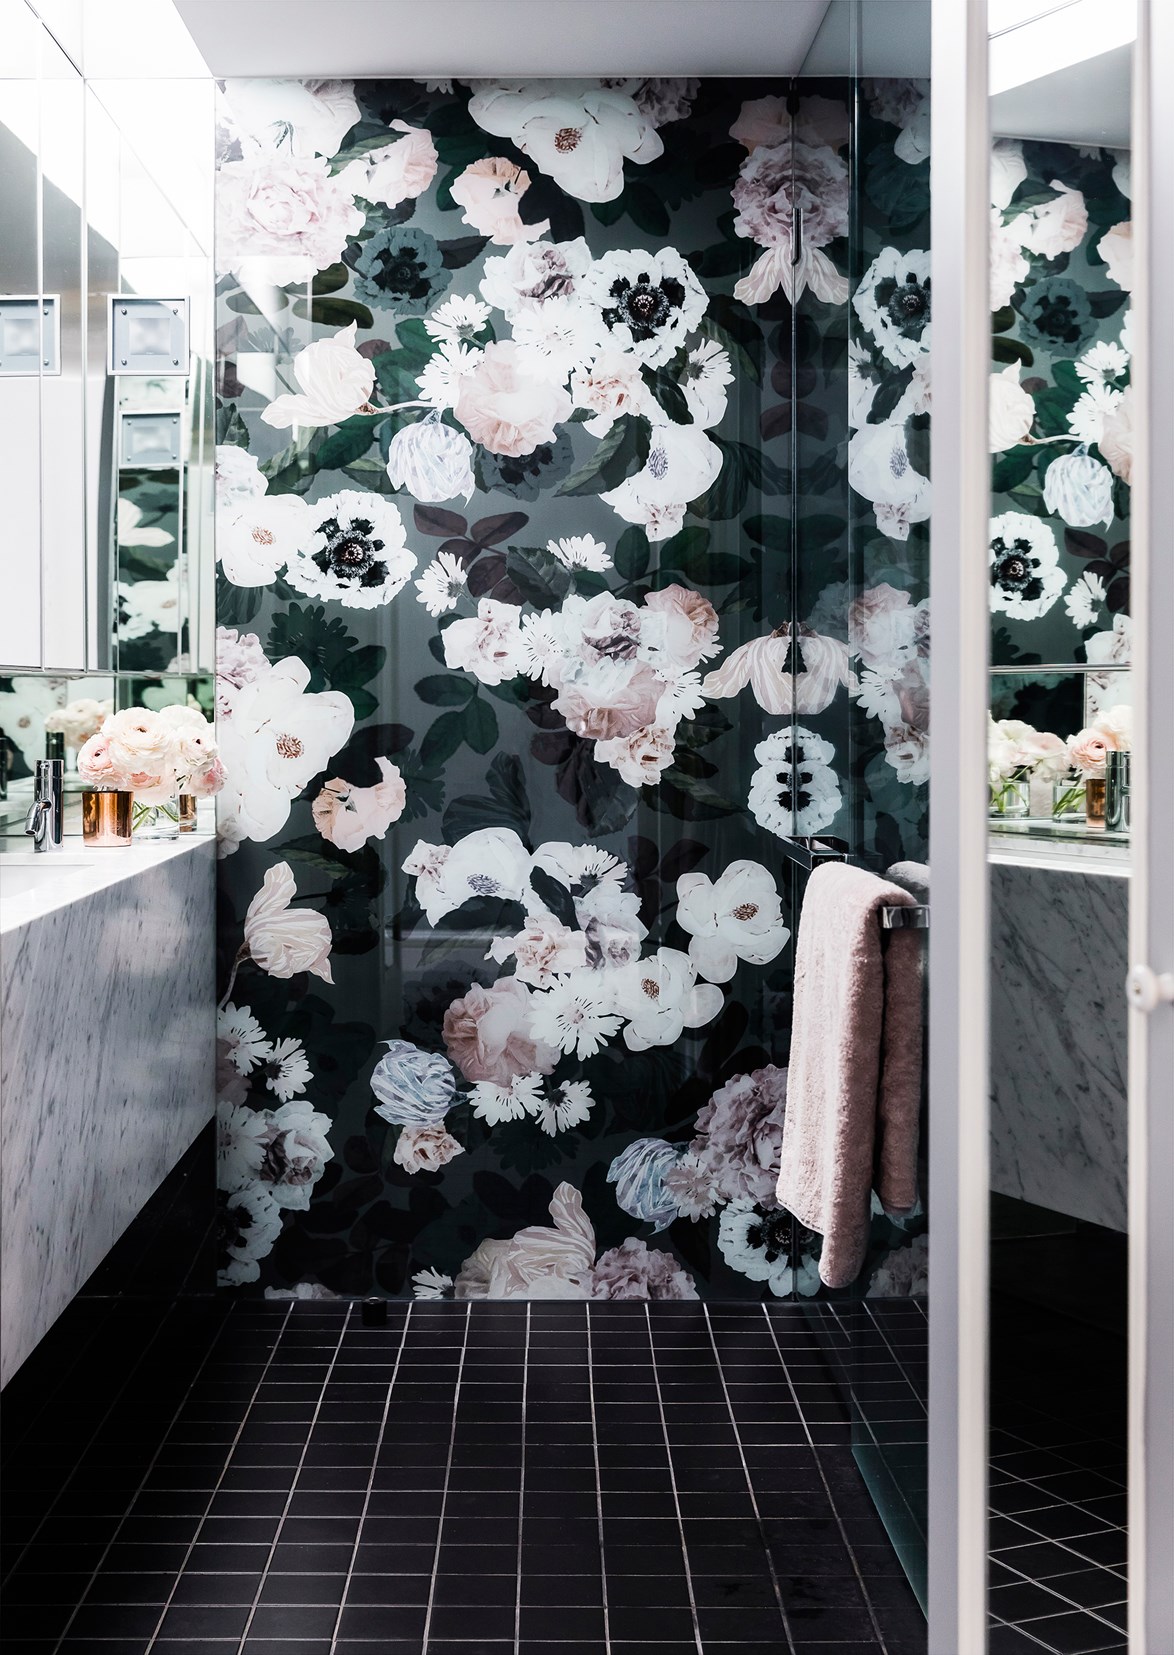 Although not technically wallpaper, this 'wallpaper-inspired' printed glass feature in a [Sydney florist's home](http://www.homestolove.com.au/the-renovated-sydney-home-of-florist-sean-cook-4711) is an excellent innovation, creating a functional, water-proof focal-point fit for a luxurious bathroom. *Photo: Maree Homer / Australian House & Garden*